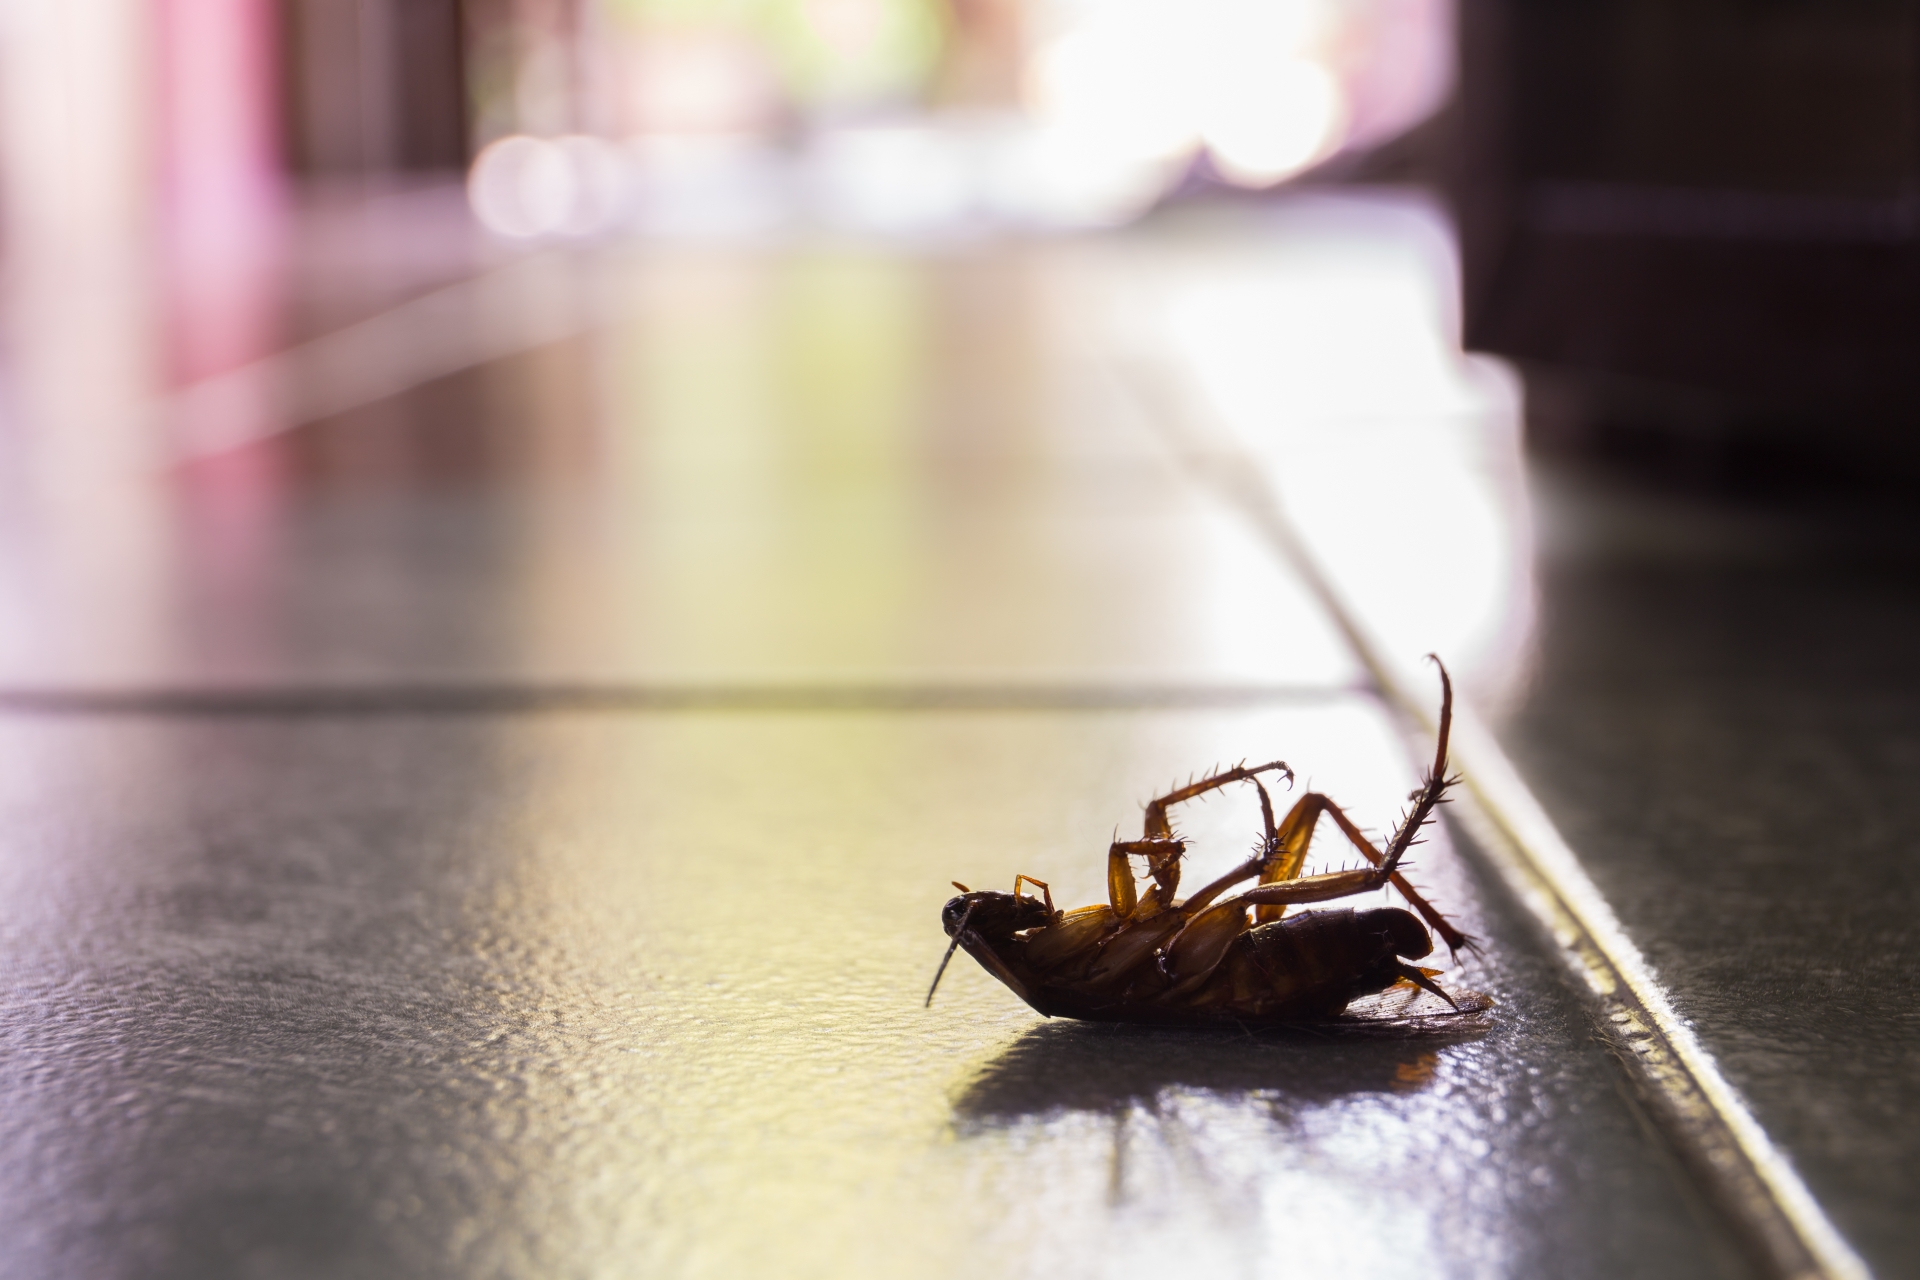 Cockroach Control, Pest Control in Southall, UB1, UB2. Call Now 020 8166 9746